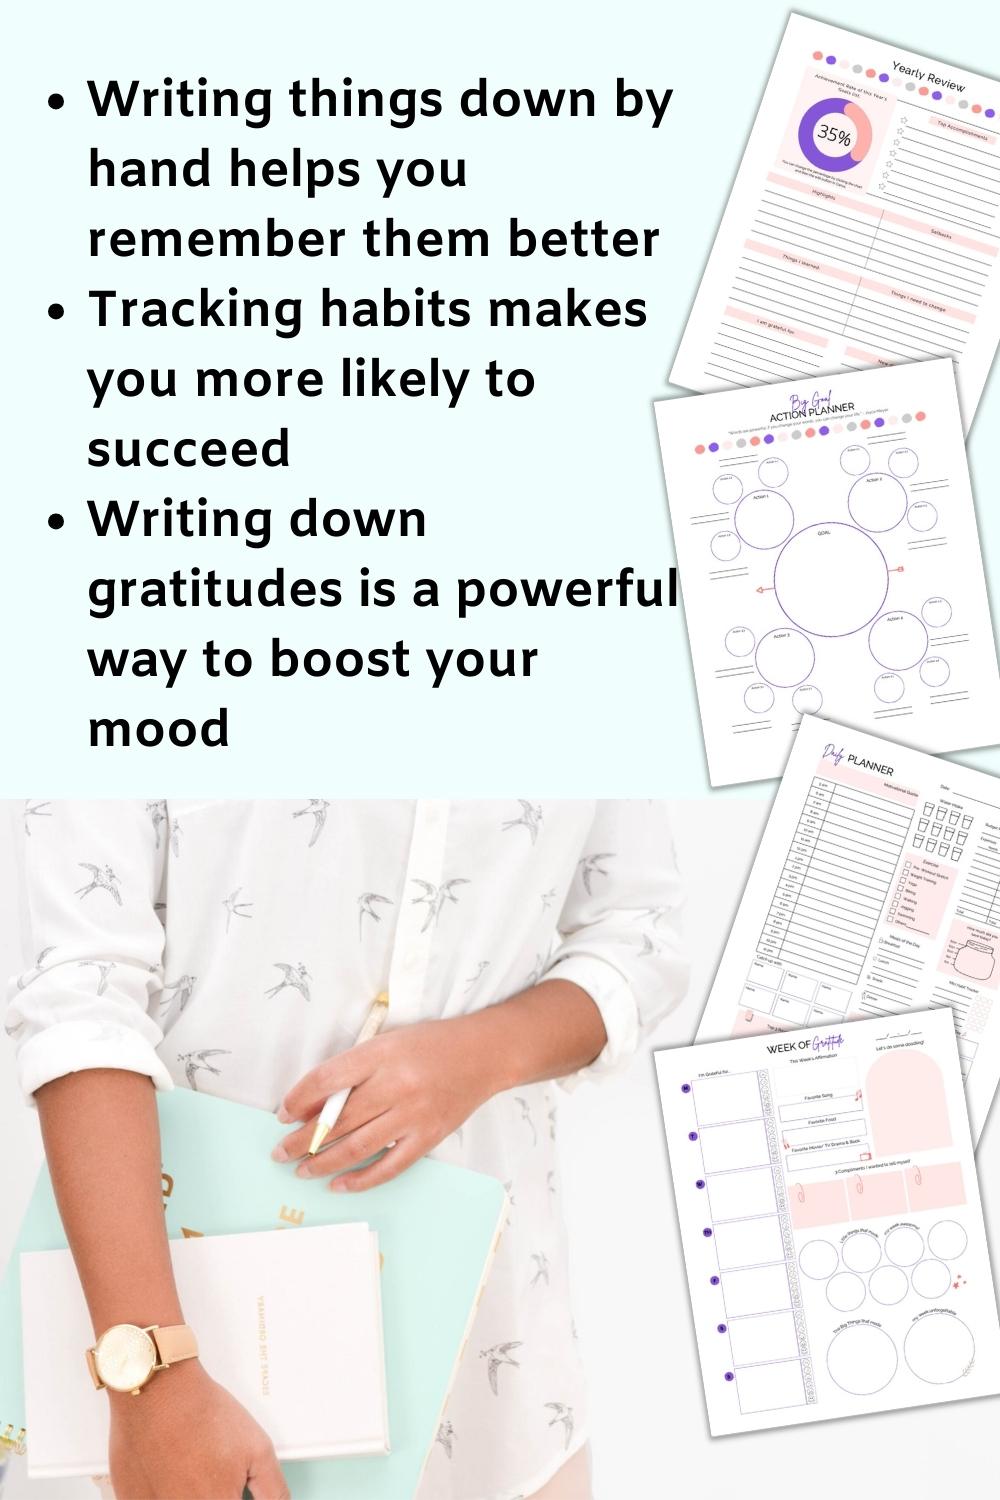 Text "writing things down by hand helps you remember them better, Tracking habits makes you more likely to succeed, and writing down gratitudes is a powerful way to boost your mood"